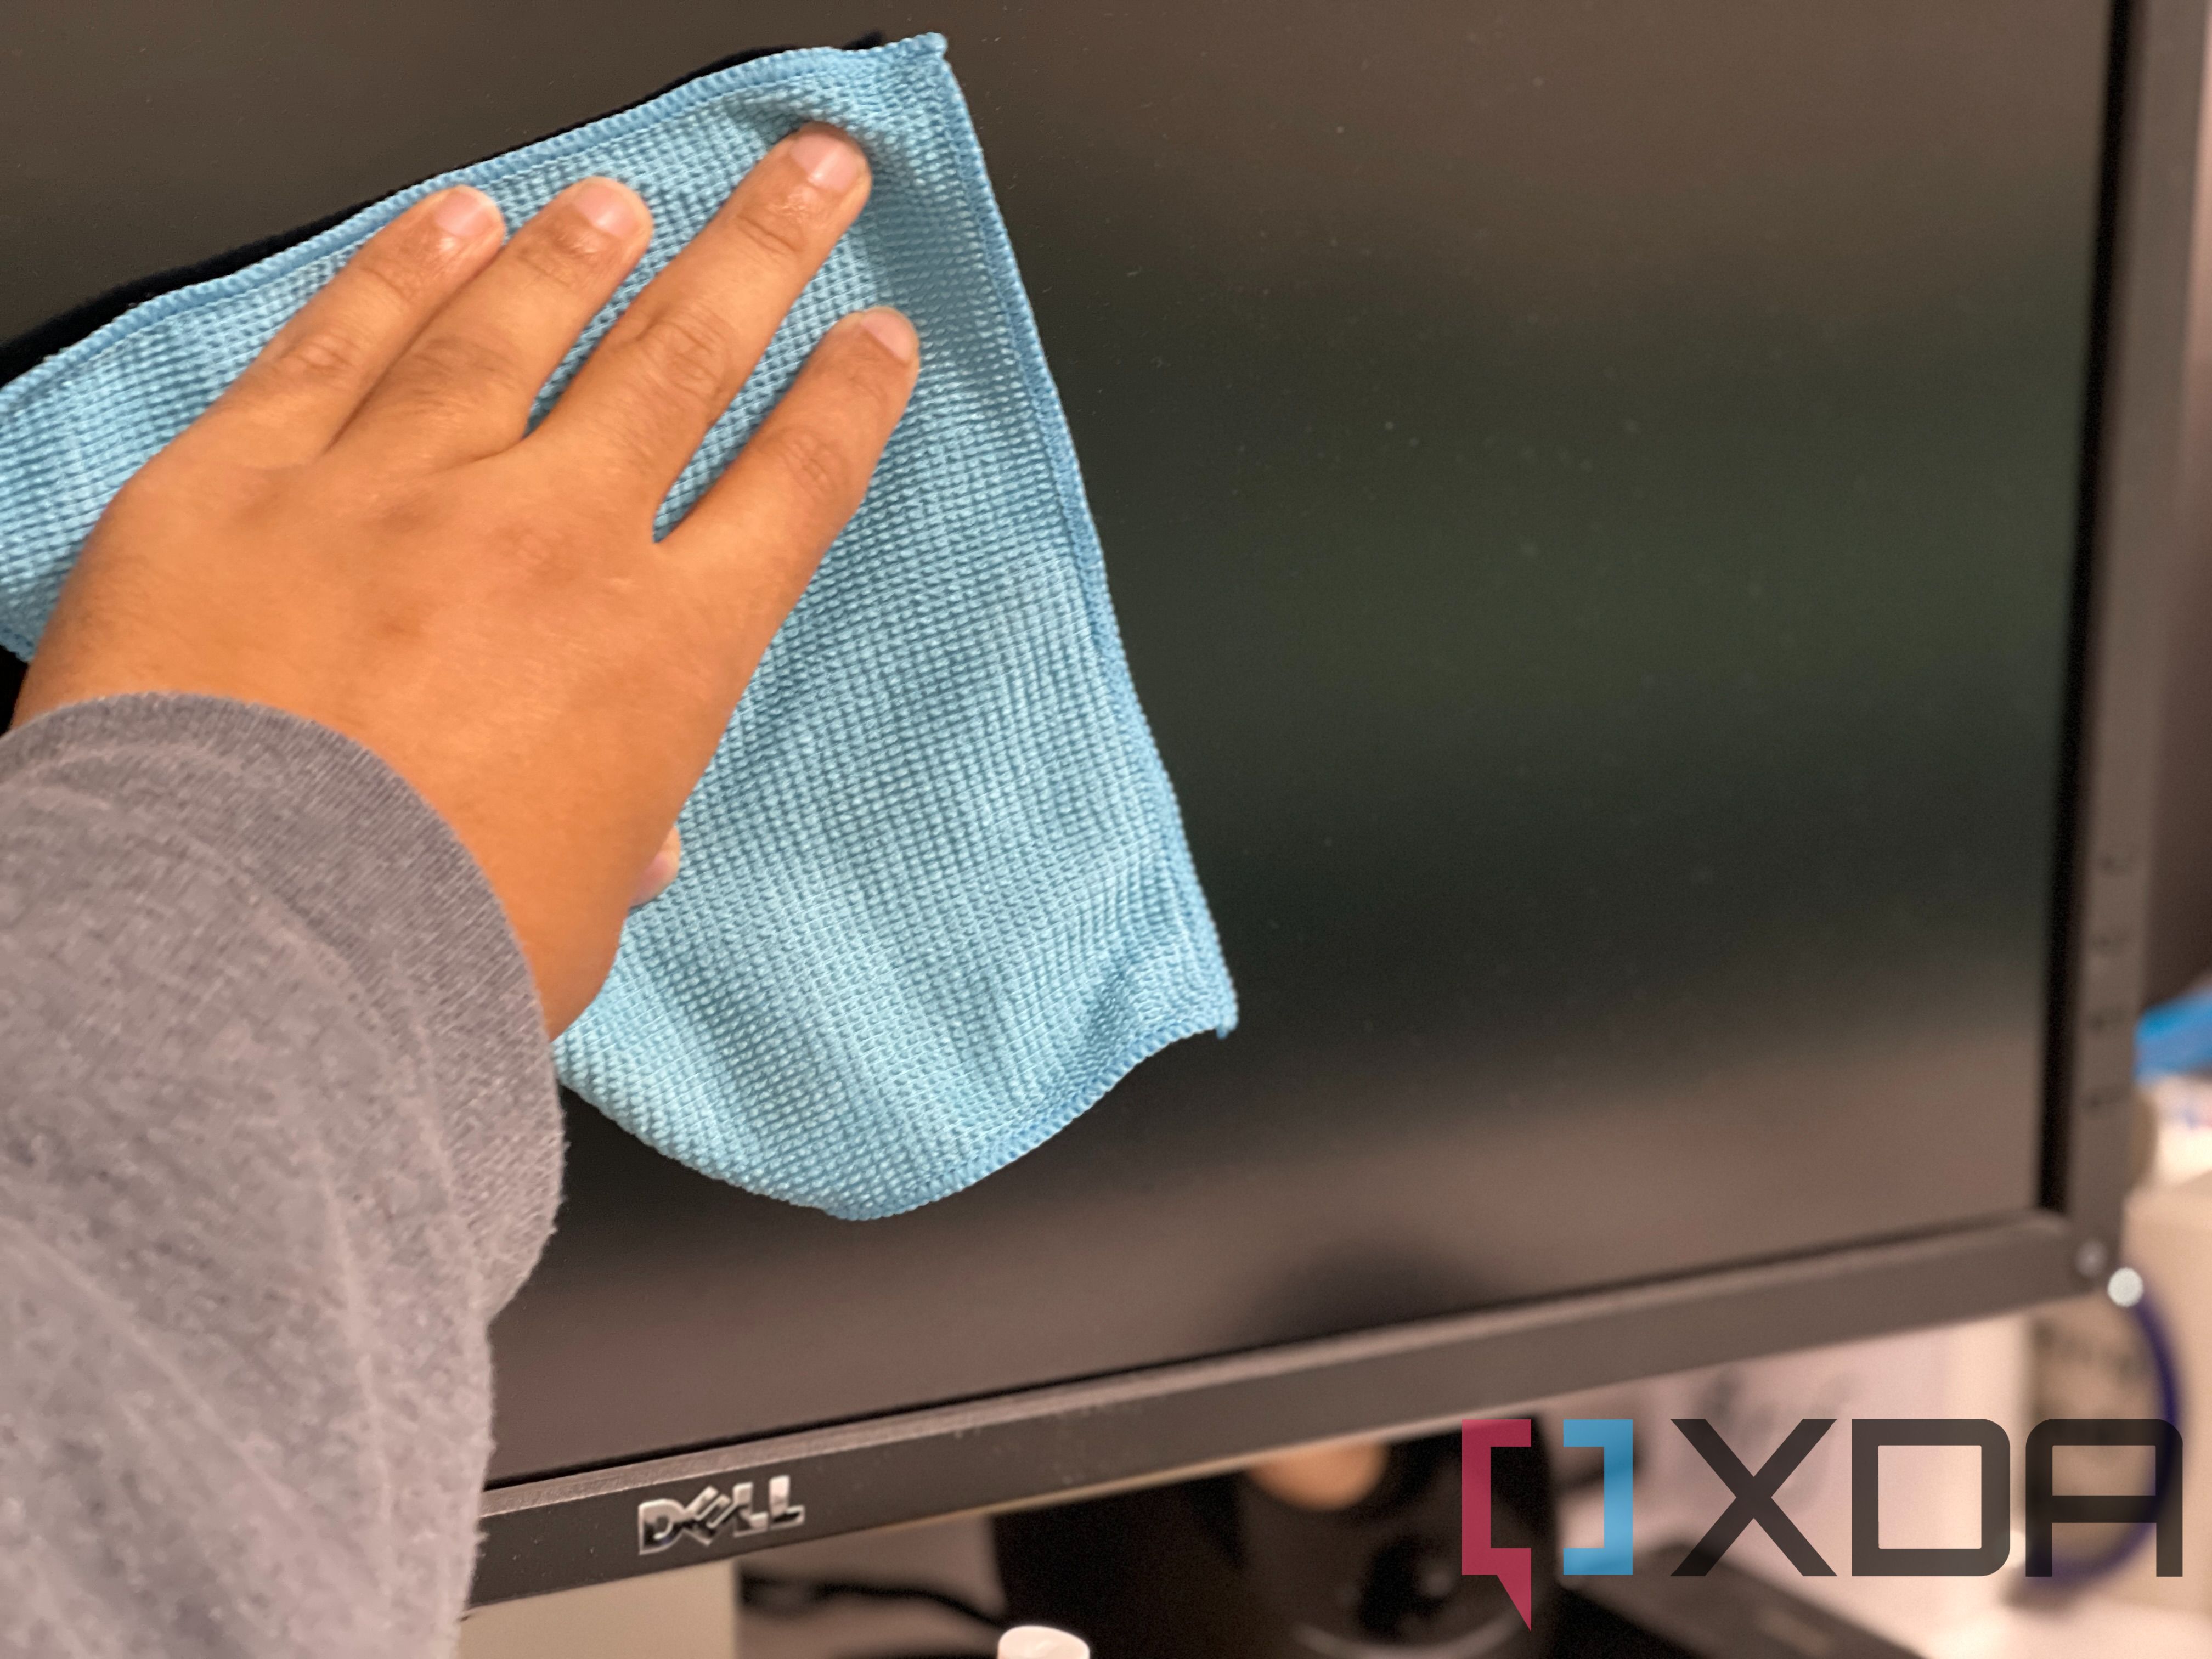 A person's hands holding a cloth over a monitor.